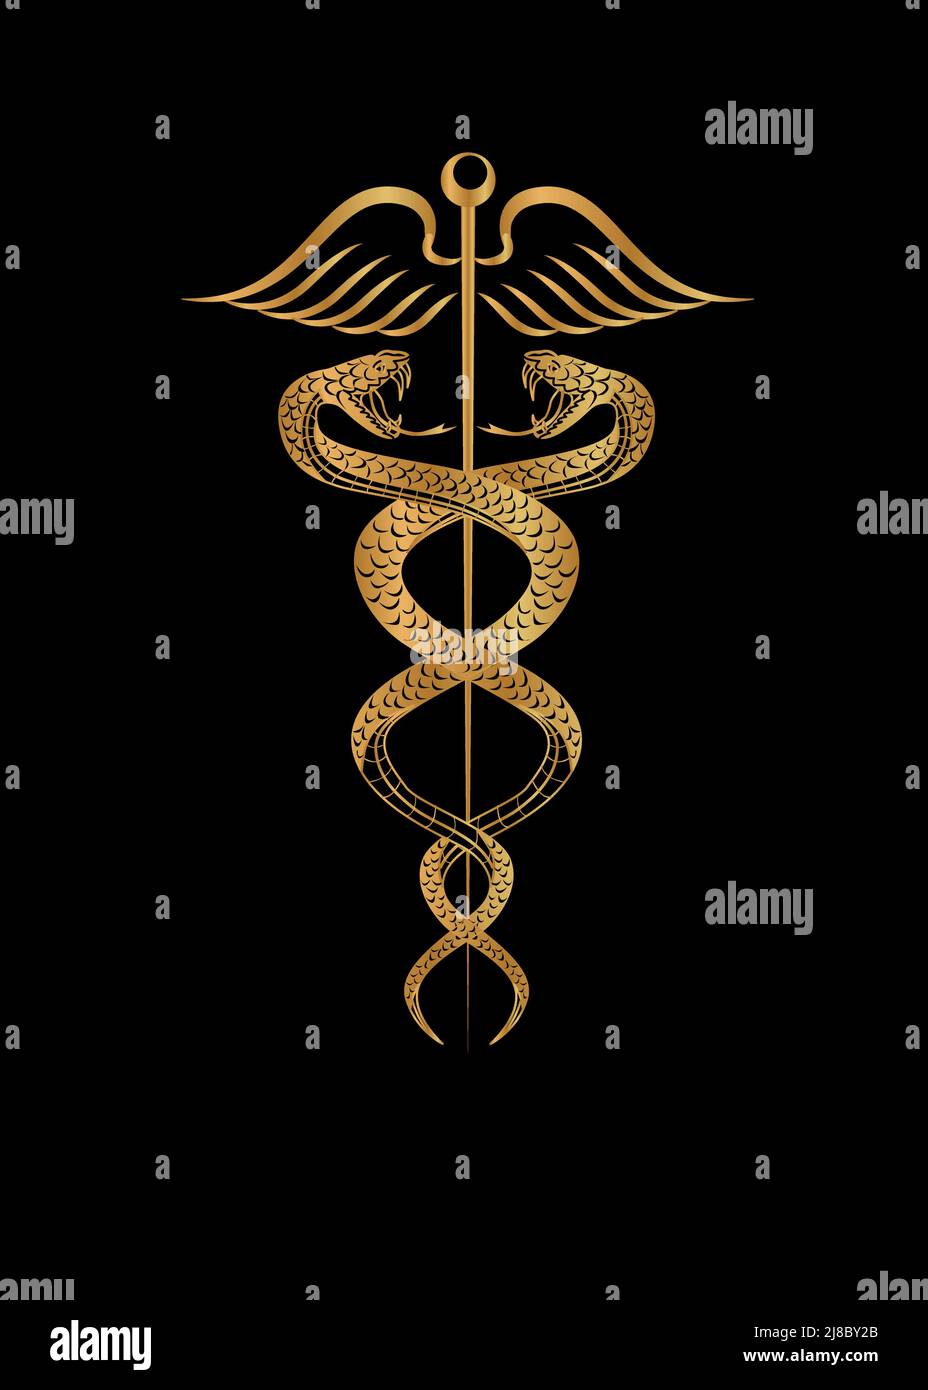 Beautiful illustration on the theme of medicine with two snakes. Stock Vector